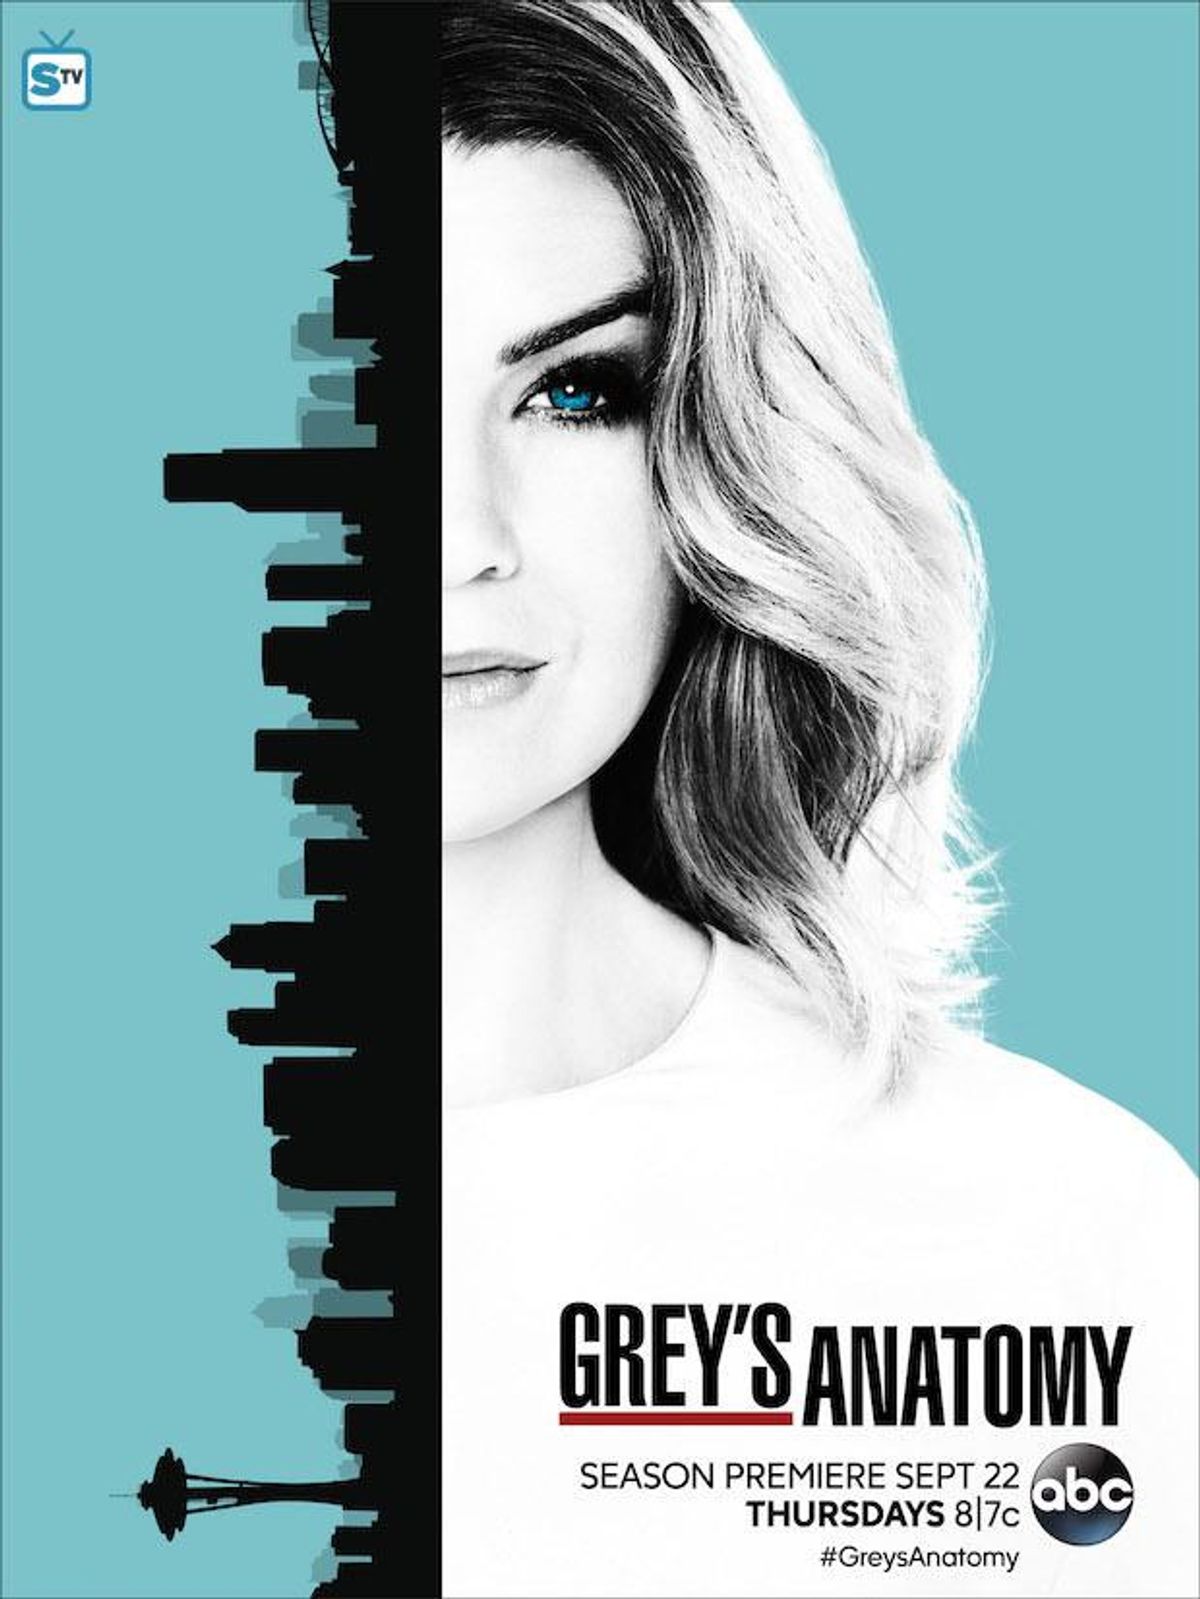 Confessions Of People Anticipating The New Grey's Anatomy Premiere